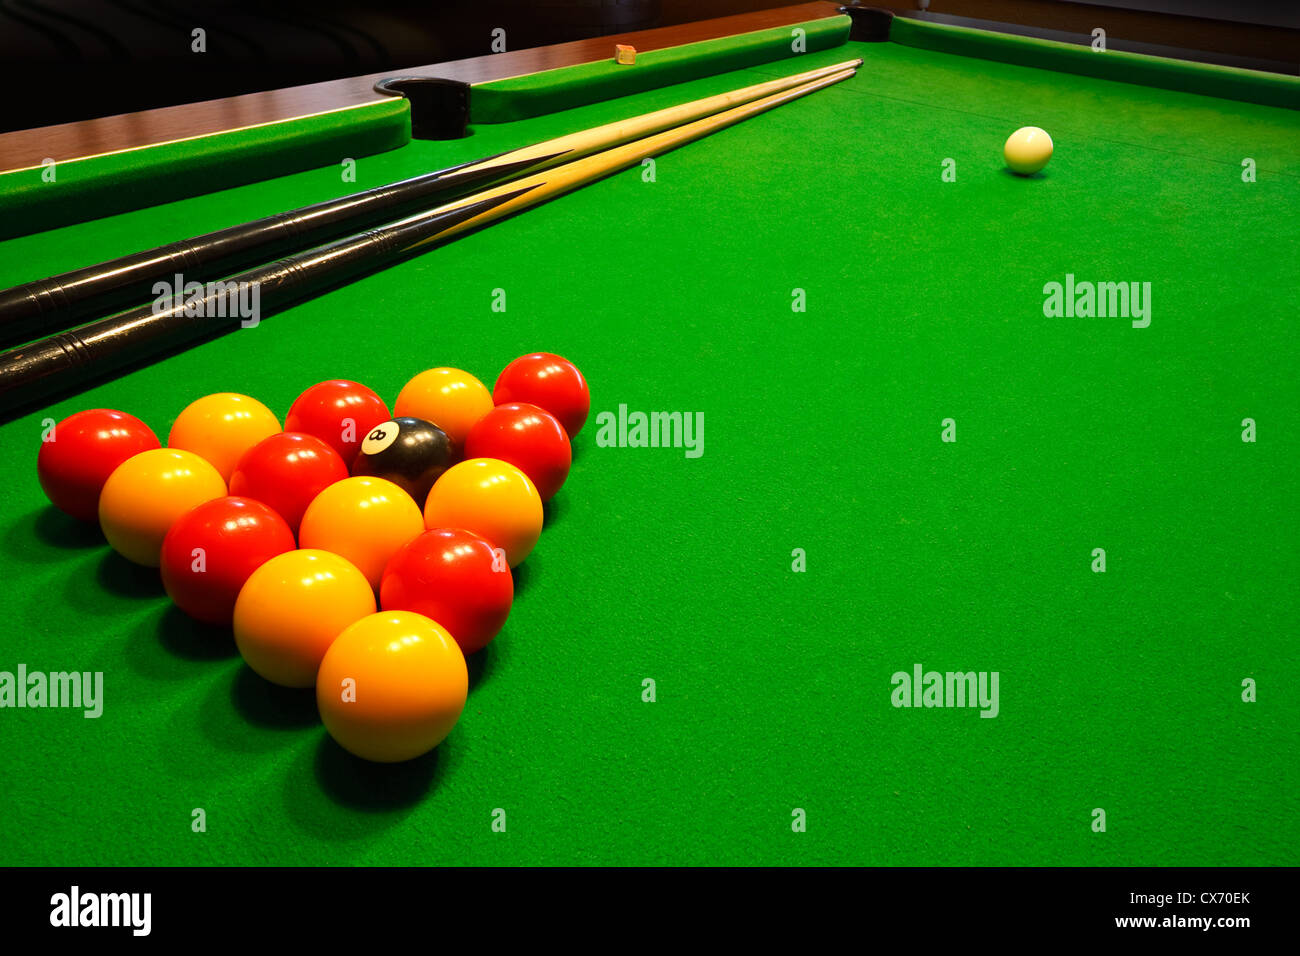 A green cloth billiards or pool table with english league red and yellow  balls Stock Photo - Alamy